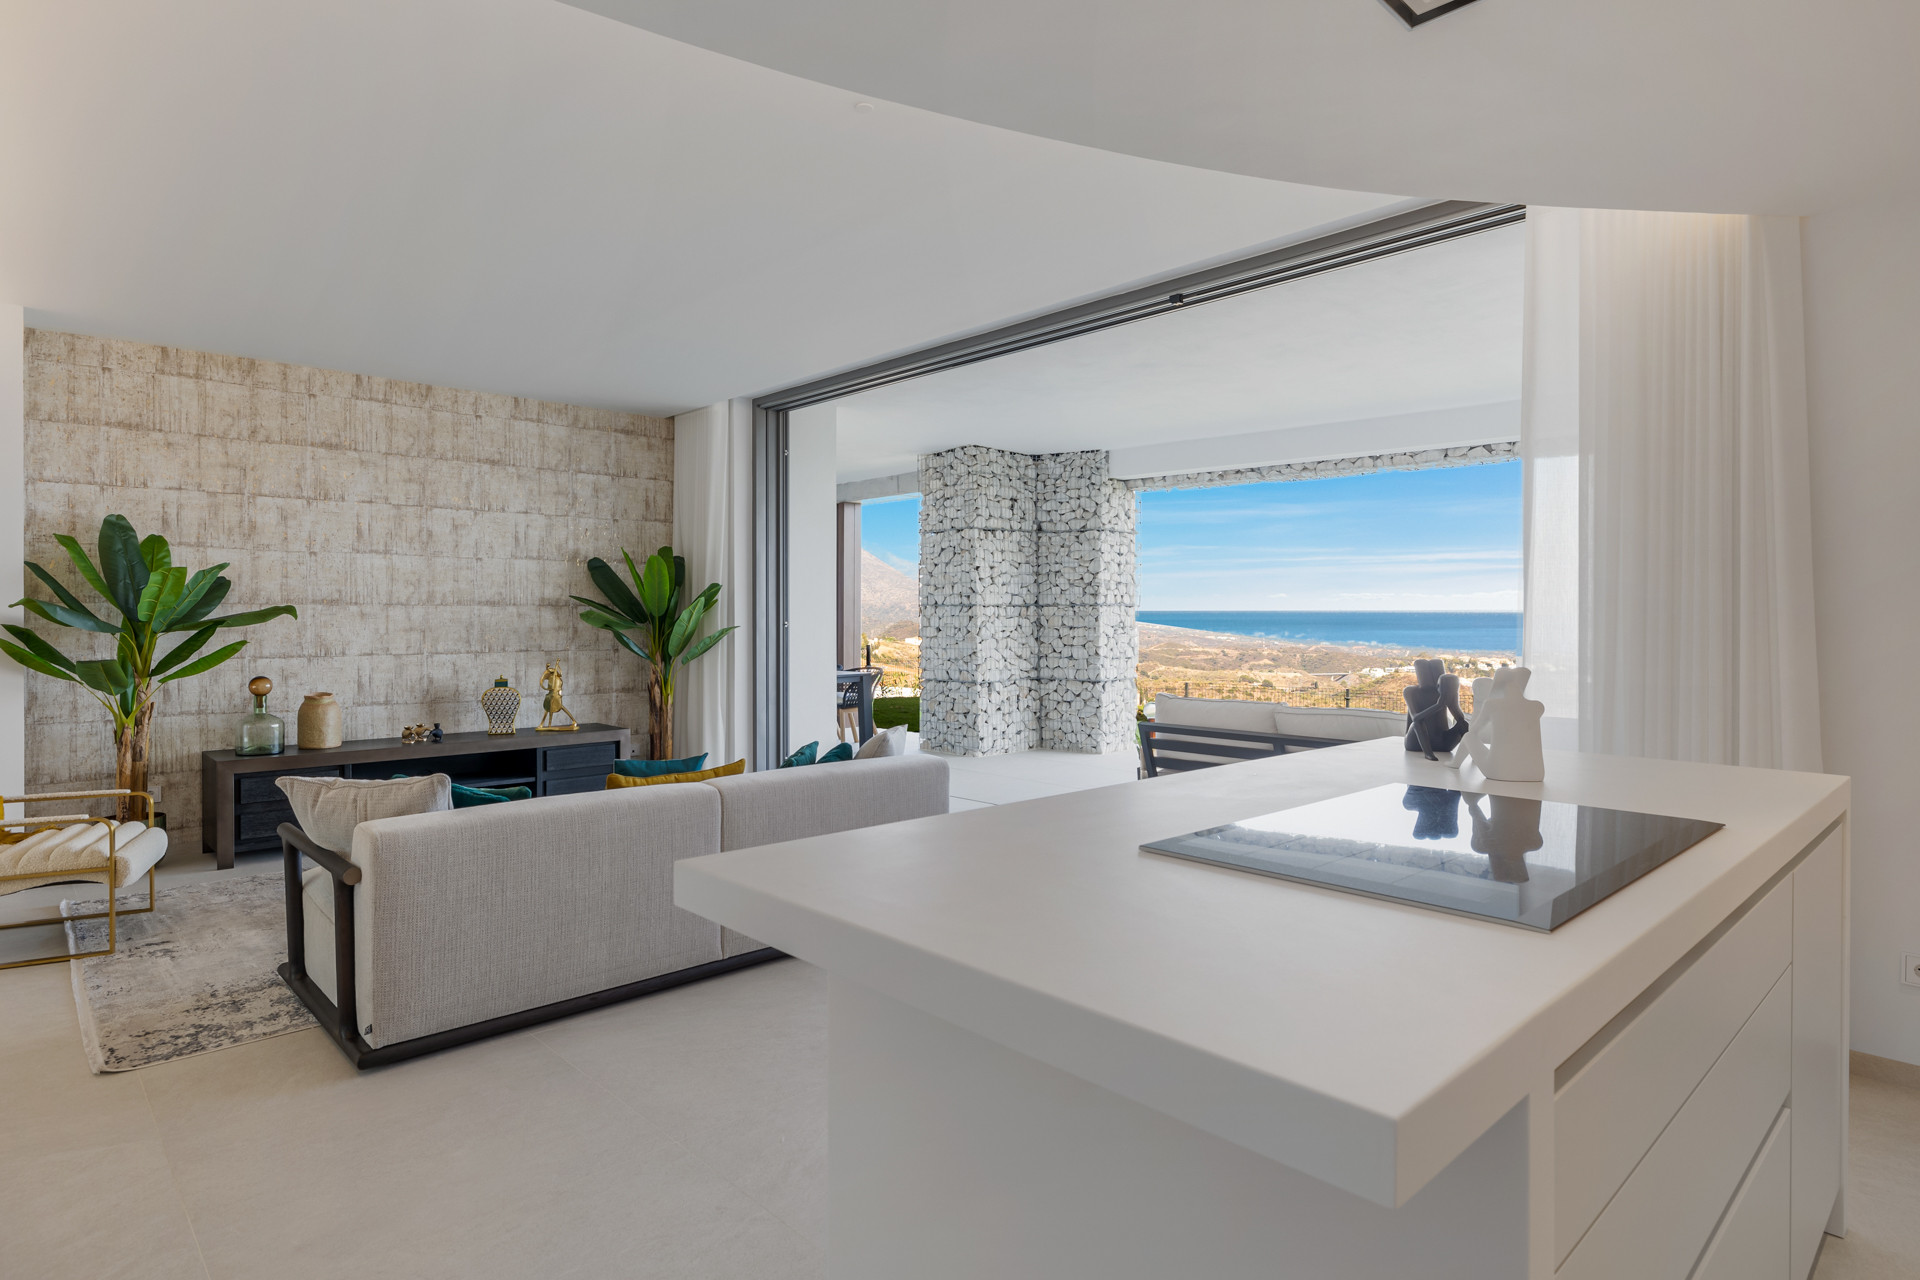 Luxury Ground Floor Living in Quercus, Real de la Quinta: New Apartment with Spectacular Mediterranean Views and Private Garden